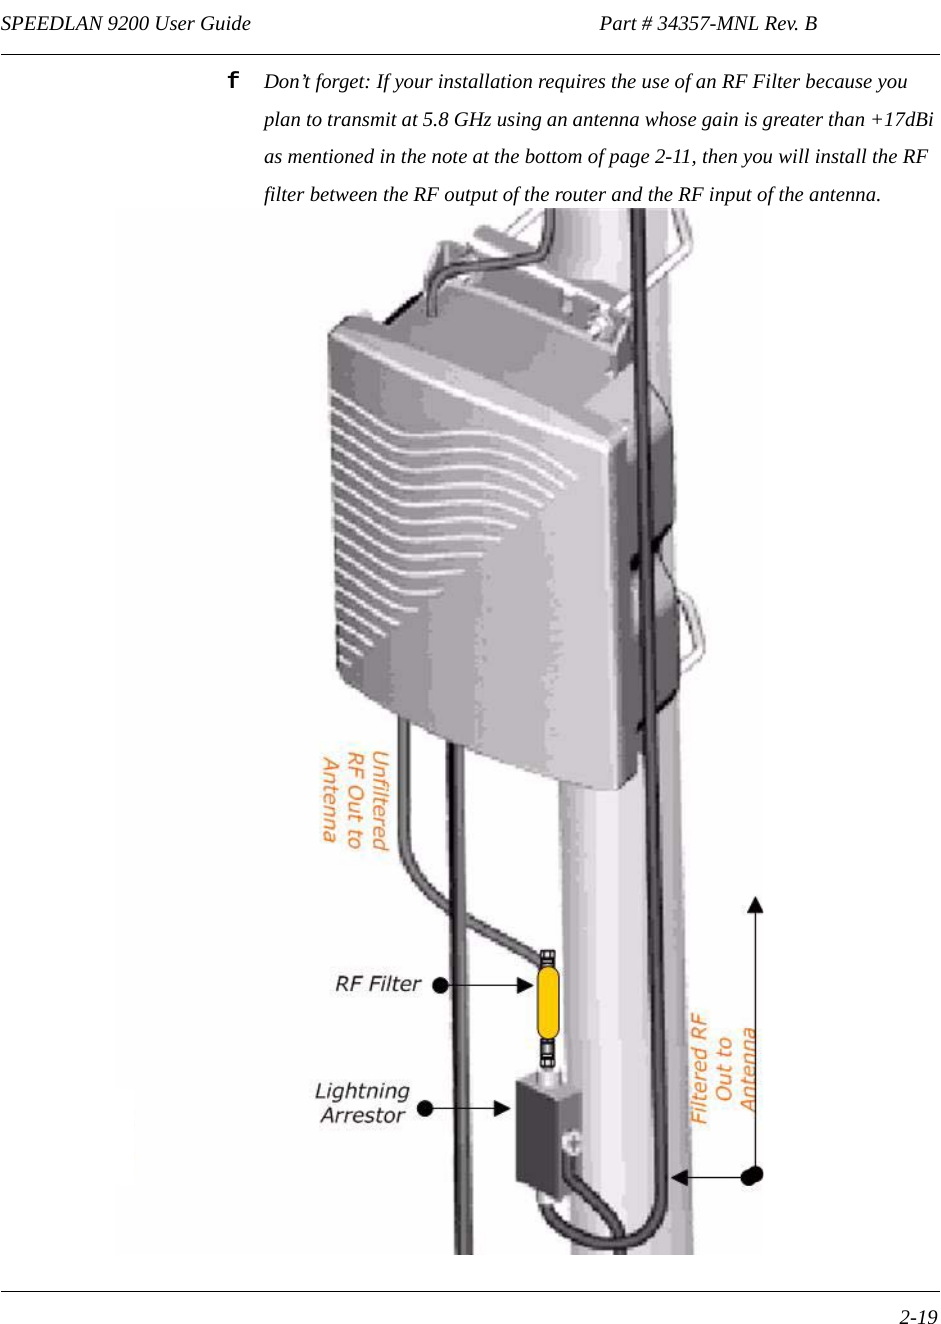 SPEEDLAN 9200 User Guide                                                                   Part # 34357-MNL Rev. B      2-19                                                                                                                                                              fDon’t forget: If your installation requires the use of an RF Filter because you plan to transmit at 5.8 GHz using an antenna whose gain is greater than +17dBi as mentioned in the note at the bottom of page 2-11, then you will install the RF filter between the RF output of the router and the RF input of the antenna. 